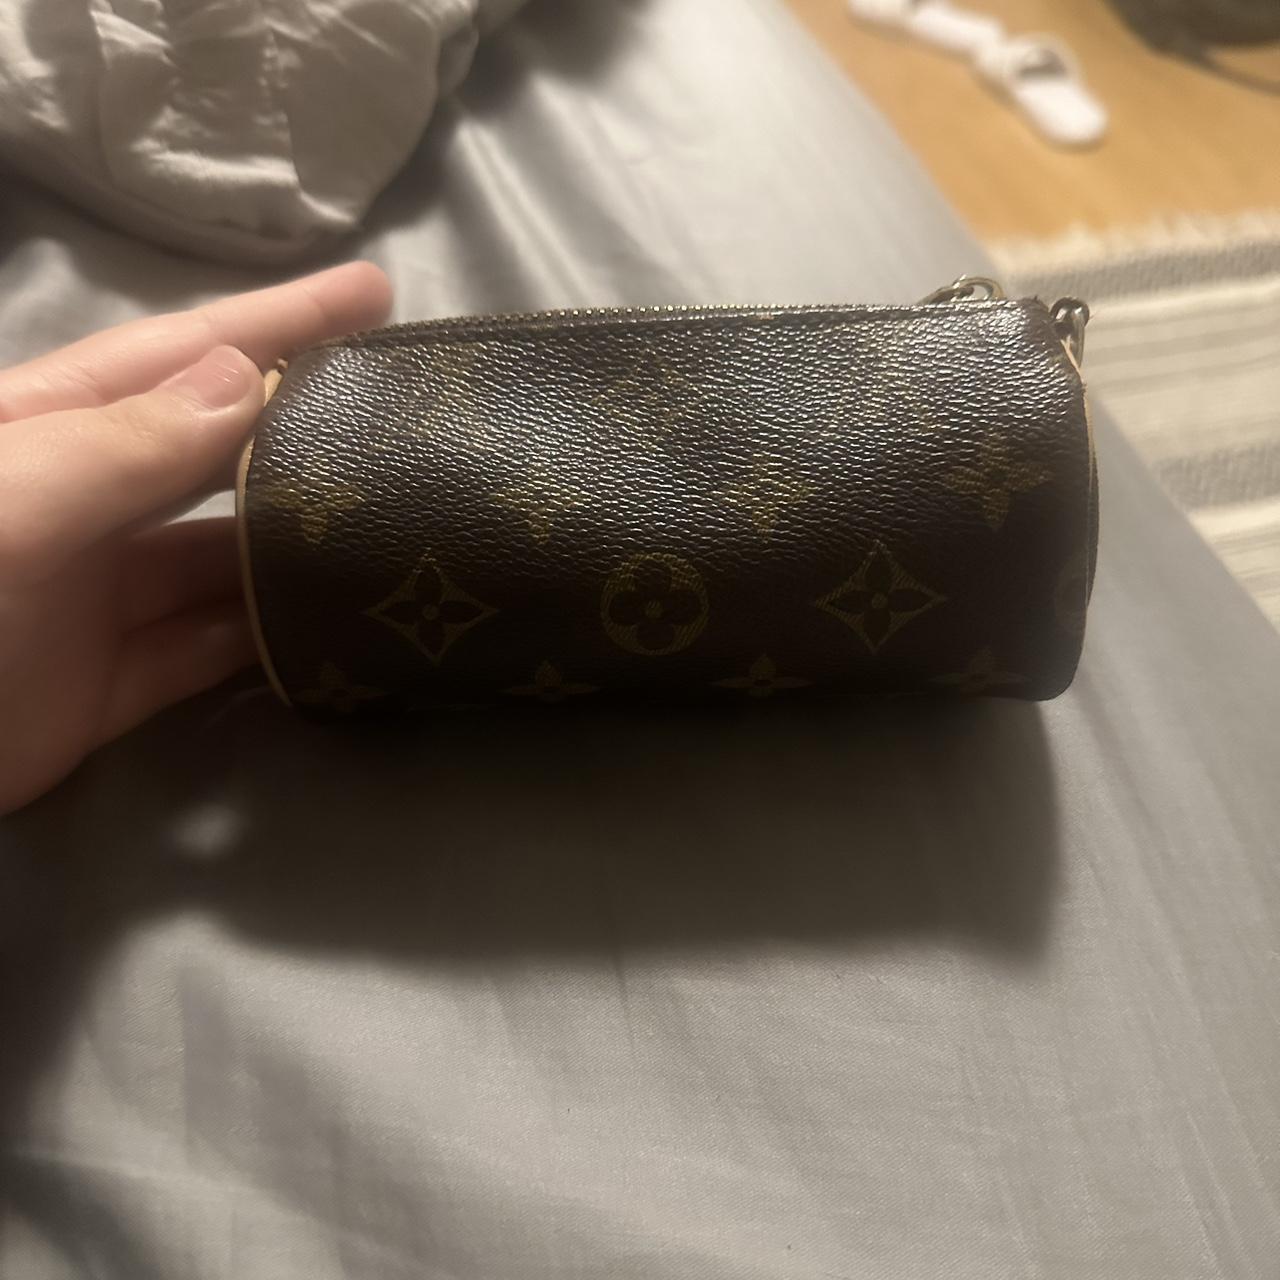 Authentic LV purse. In good condition. Barely used.